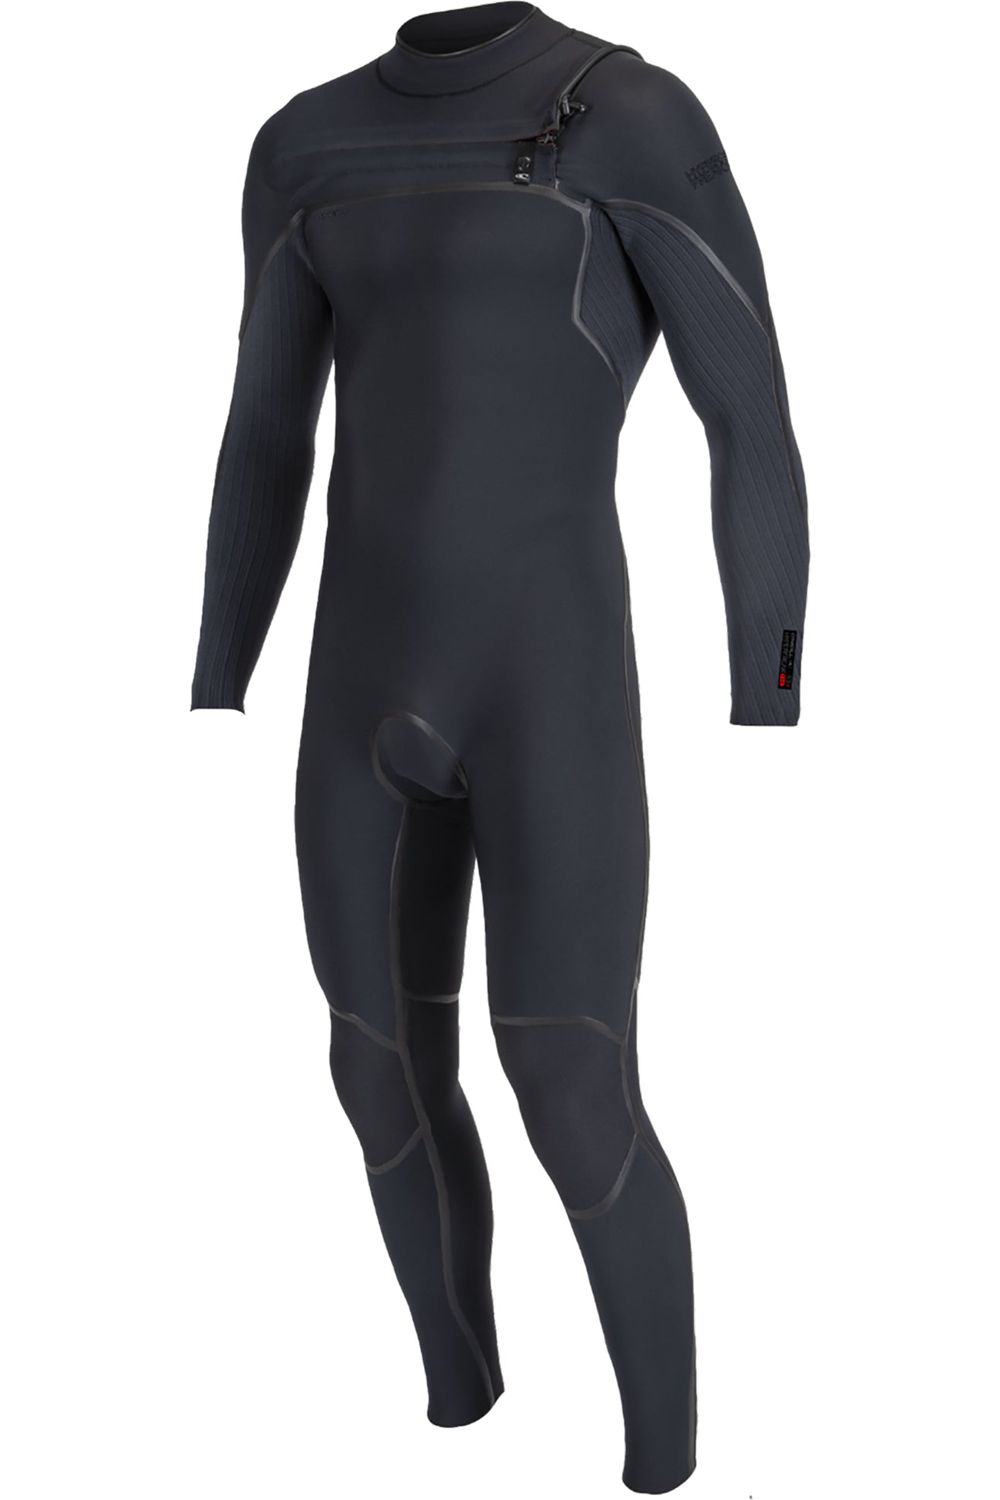 O'neill Hyperfreak Fire Wetsuit 4/3+ chest zip image from the front